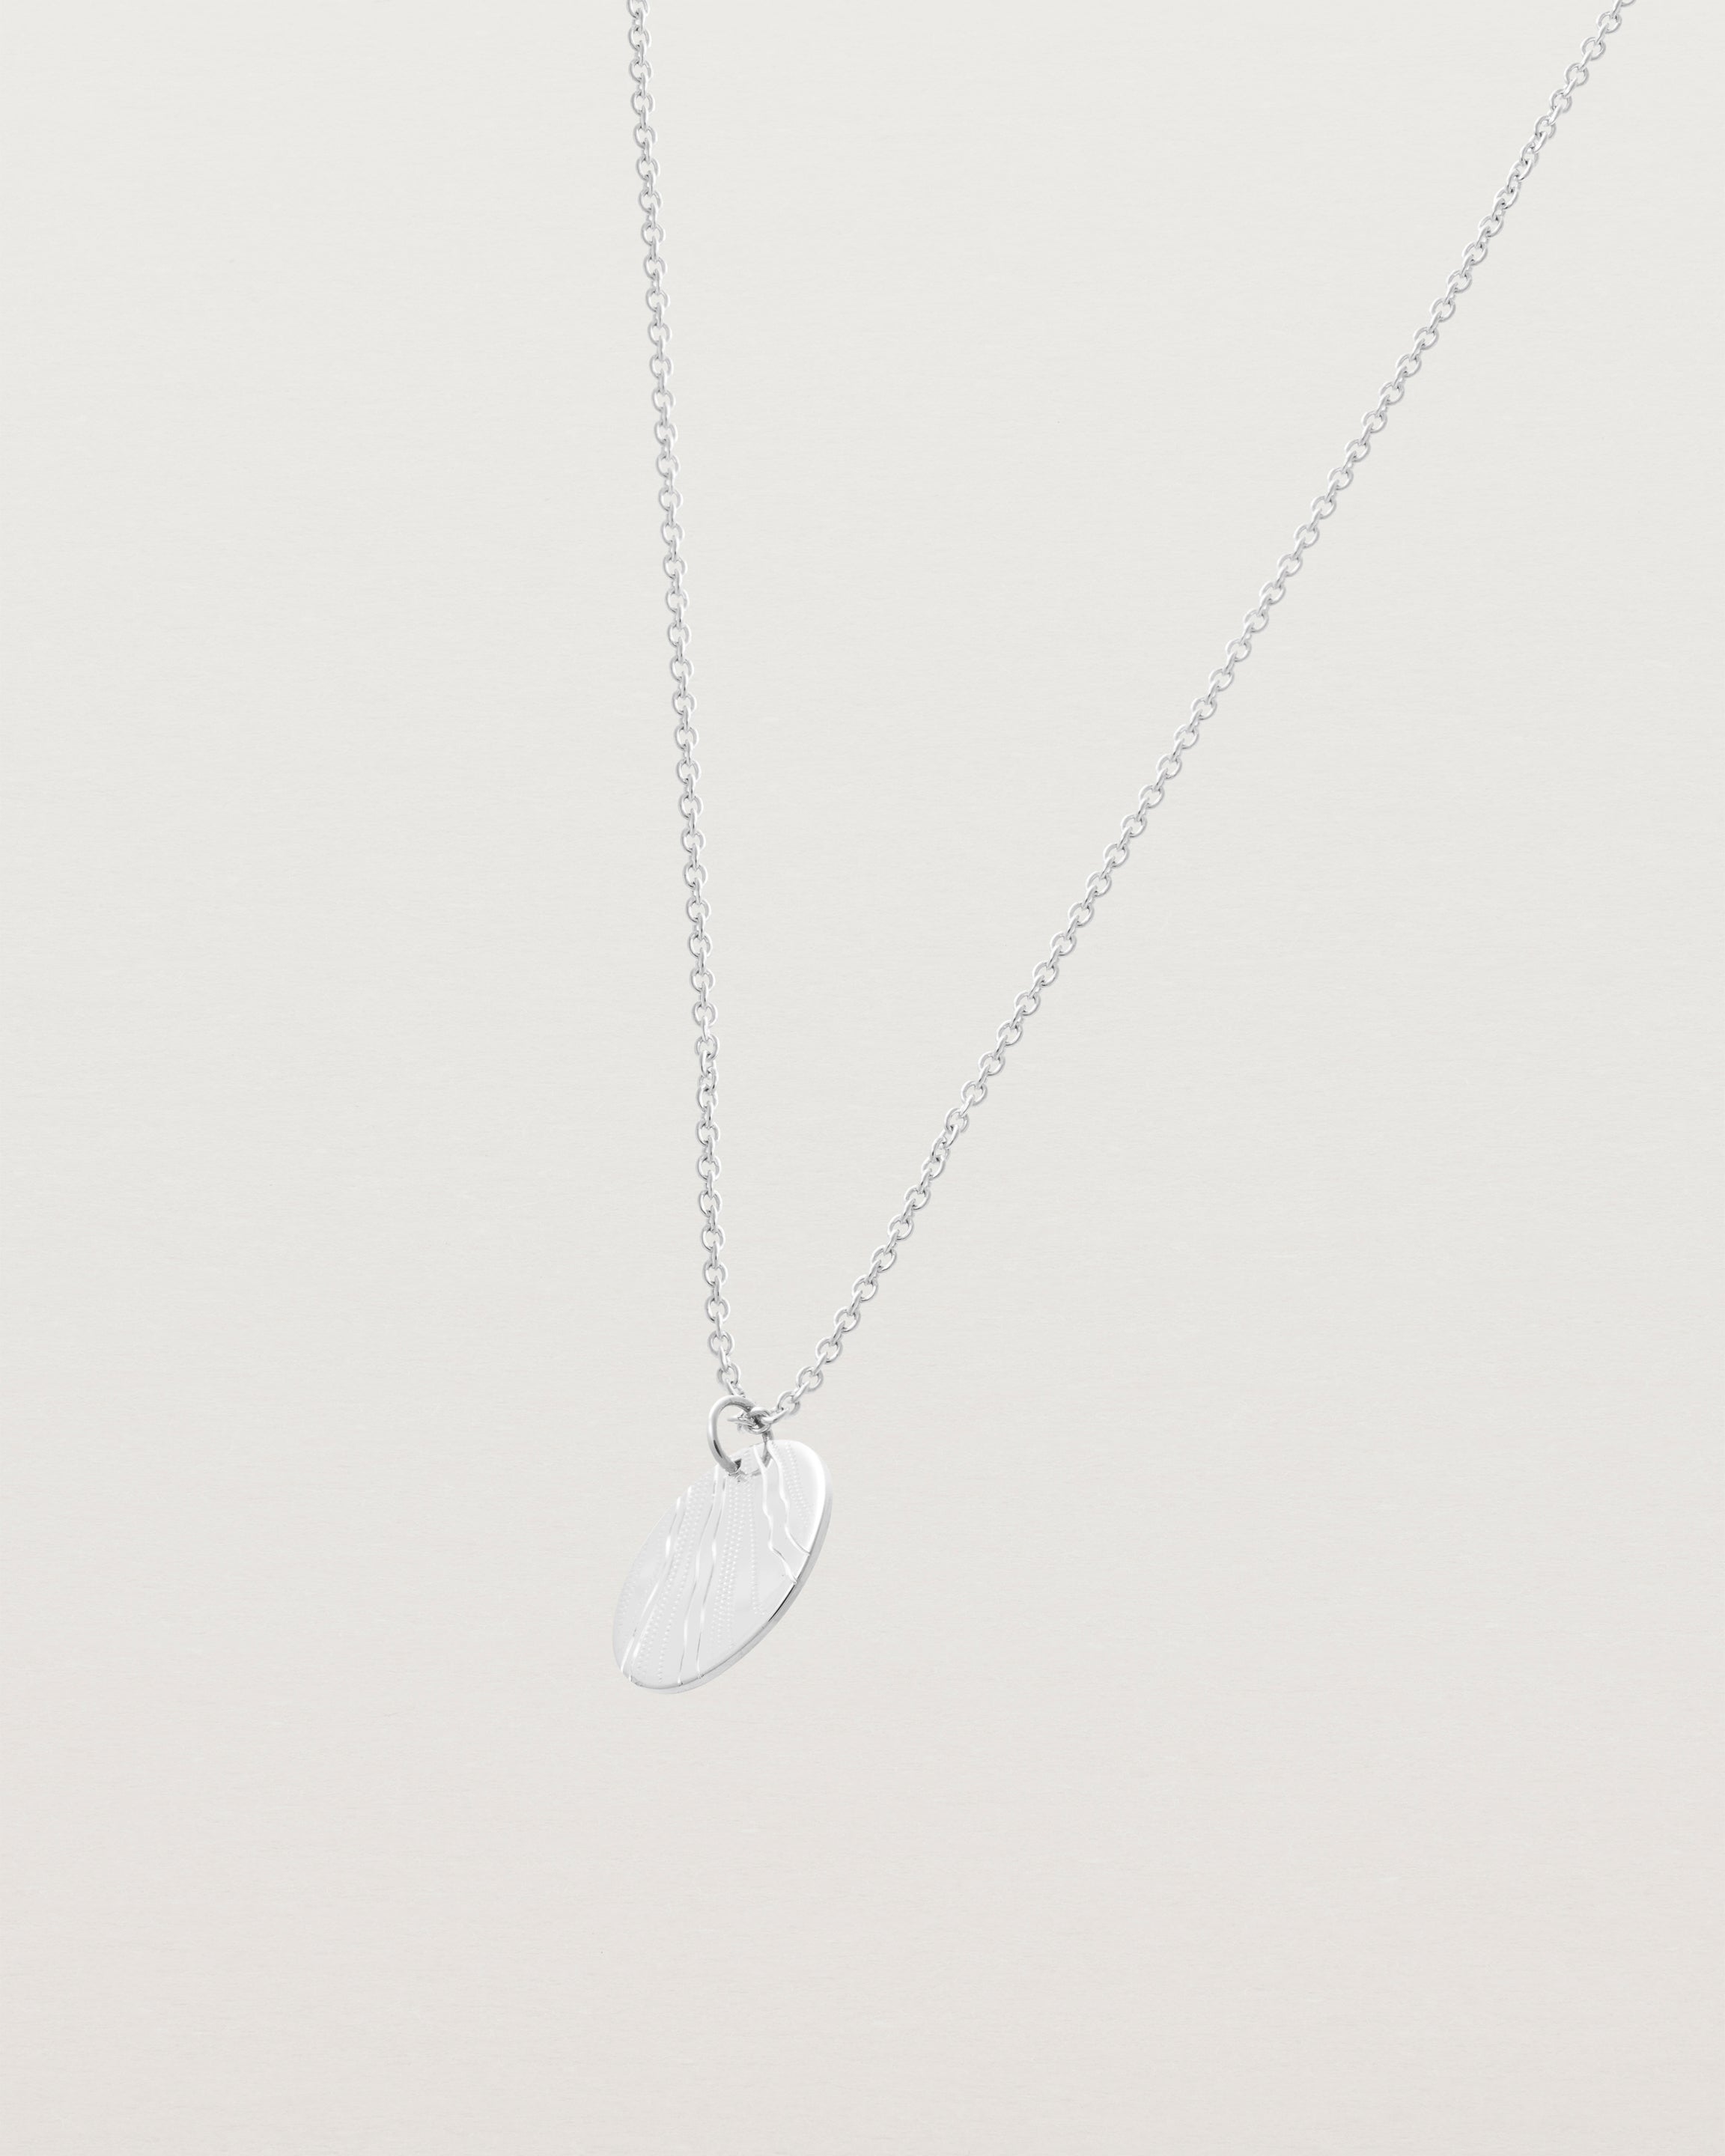 An engraved sterling silver pendant